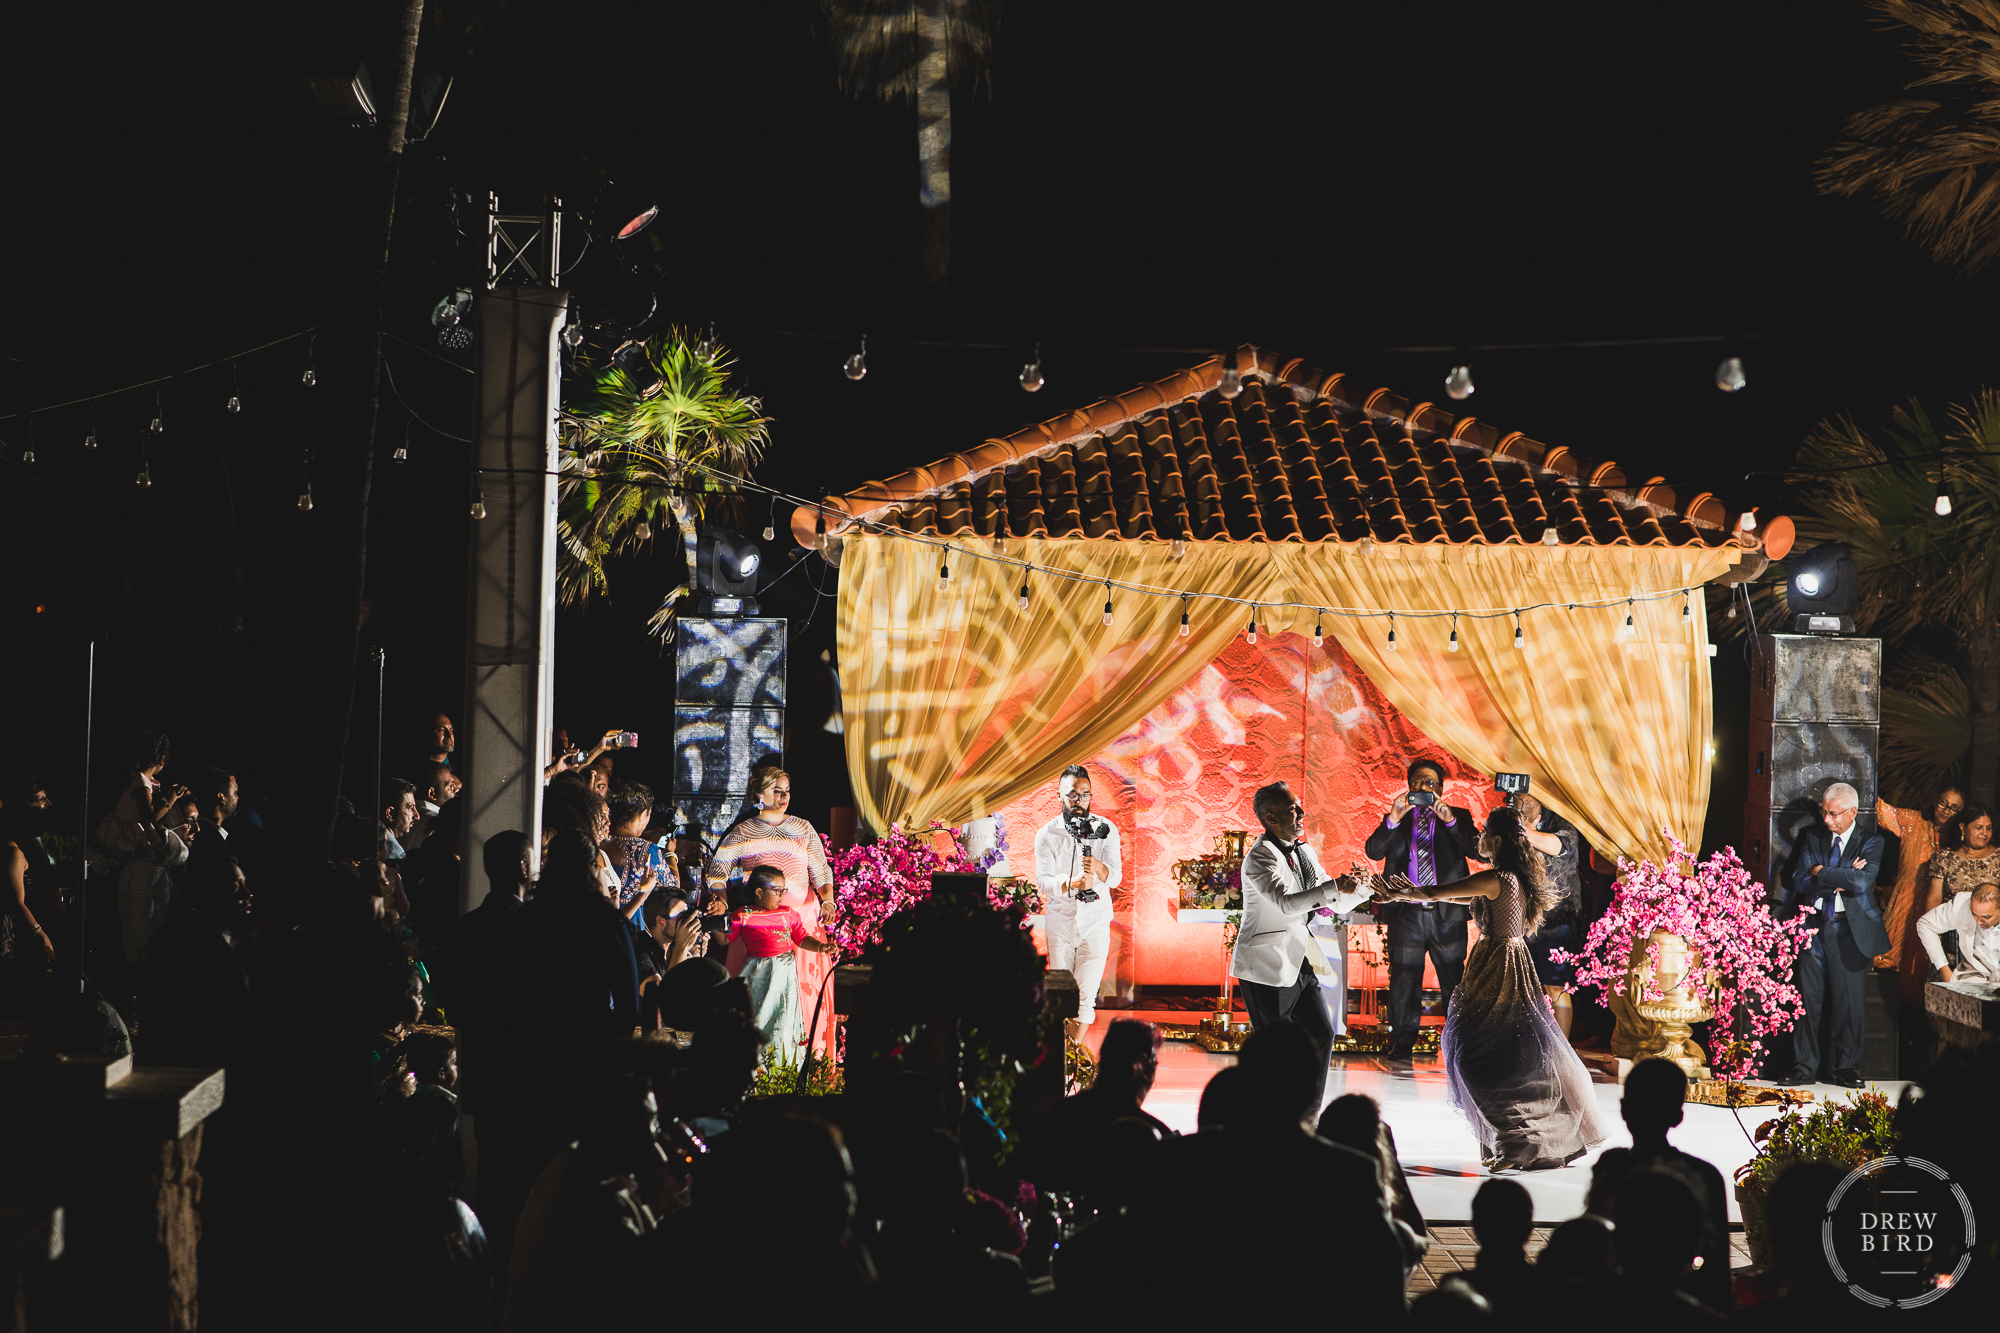 An incredible night time photo of the indian bride and groom during their first dance on the outdoor patio at Tierra del Sol, an elegant wedding venue on Aruba in the Caribbean. This photo shows the entire dance floor, buildings, and the wedding guests watching and cheering.